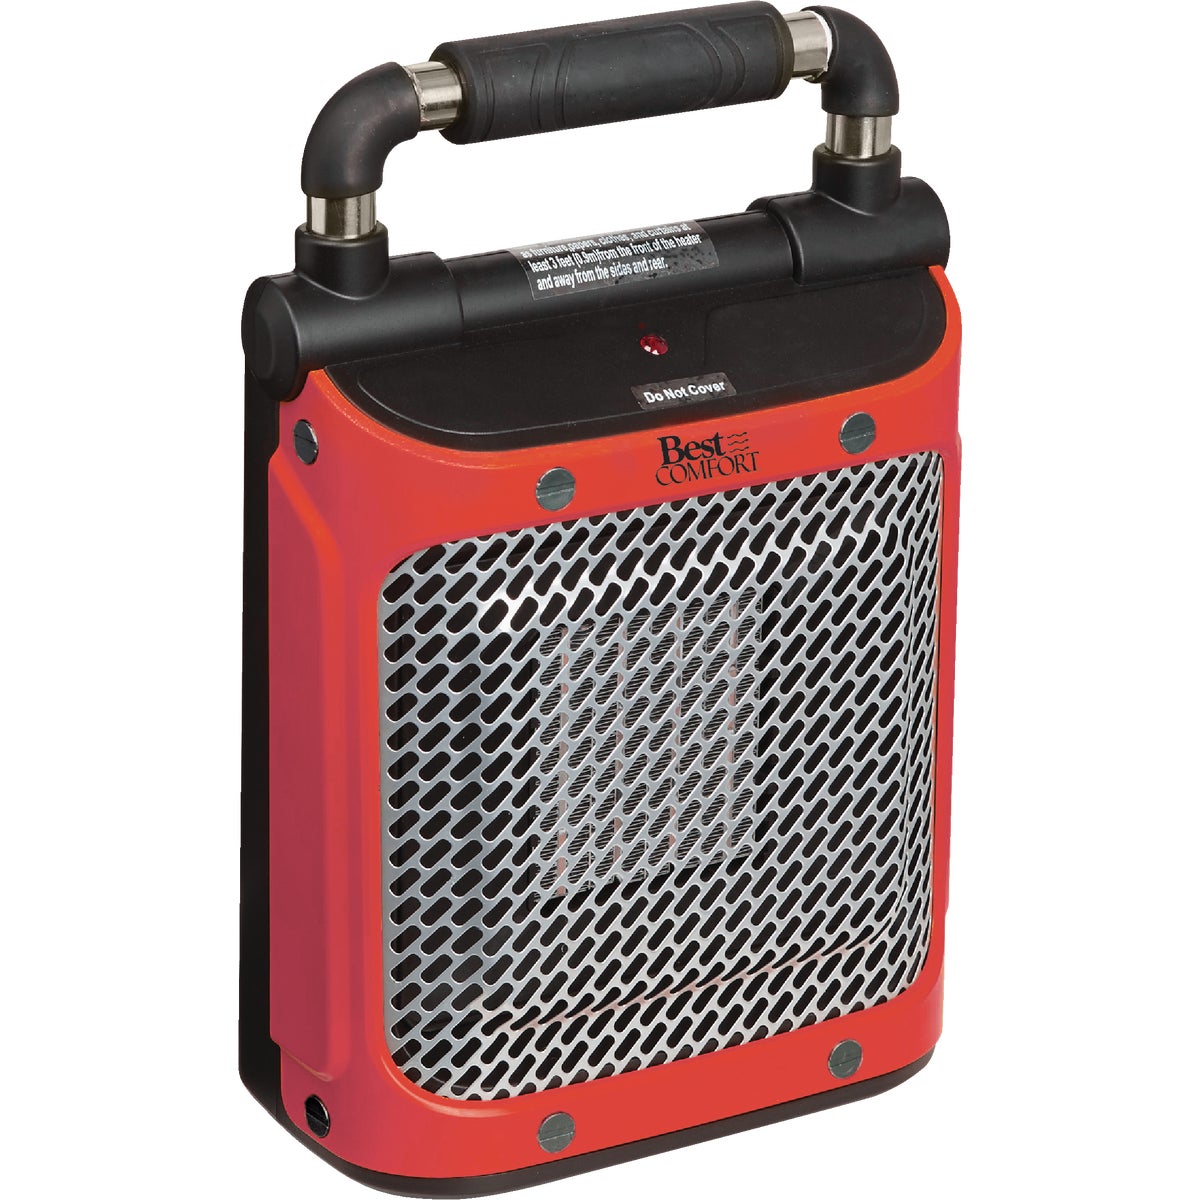 Item 401074, Durable and effective, the recirculation utility heater has a metal housing